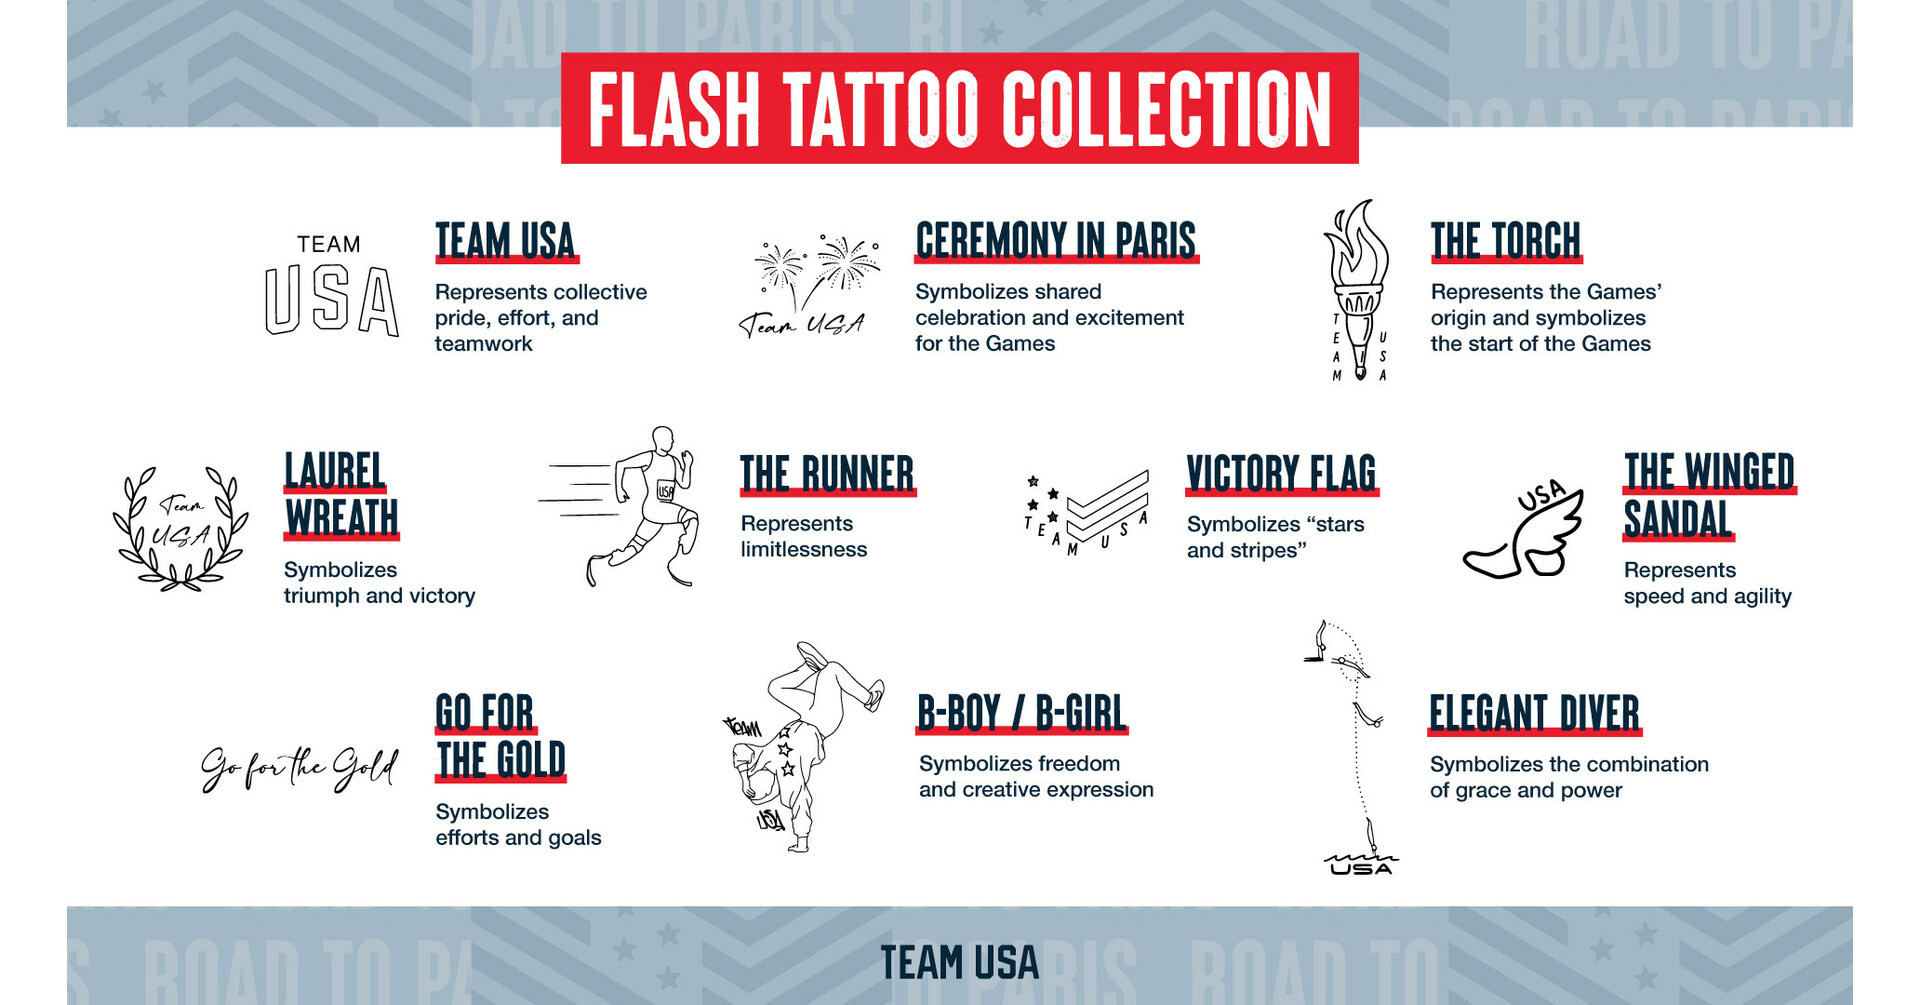 USOPC invites fans to get "made-to-fade" tattoos to mark one year until Paris 2024 